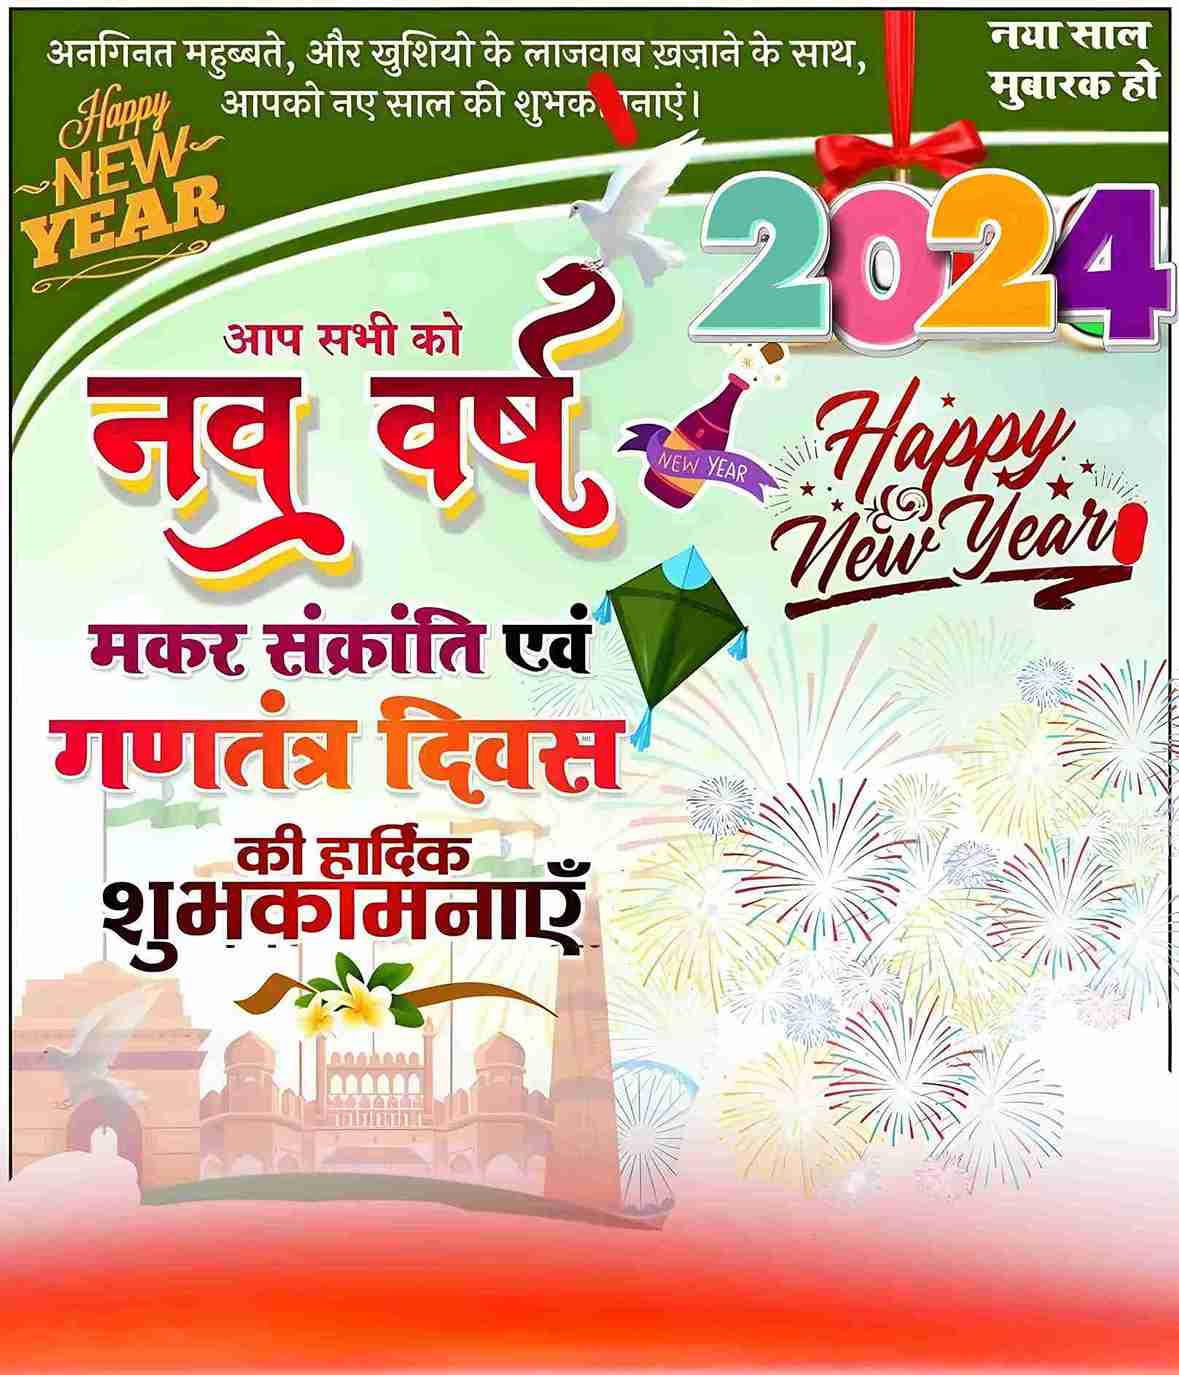 New Year 2024 Banner Background in Hindi